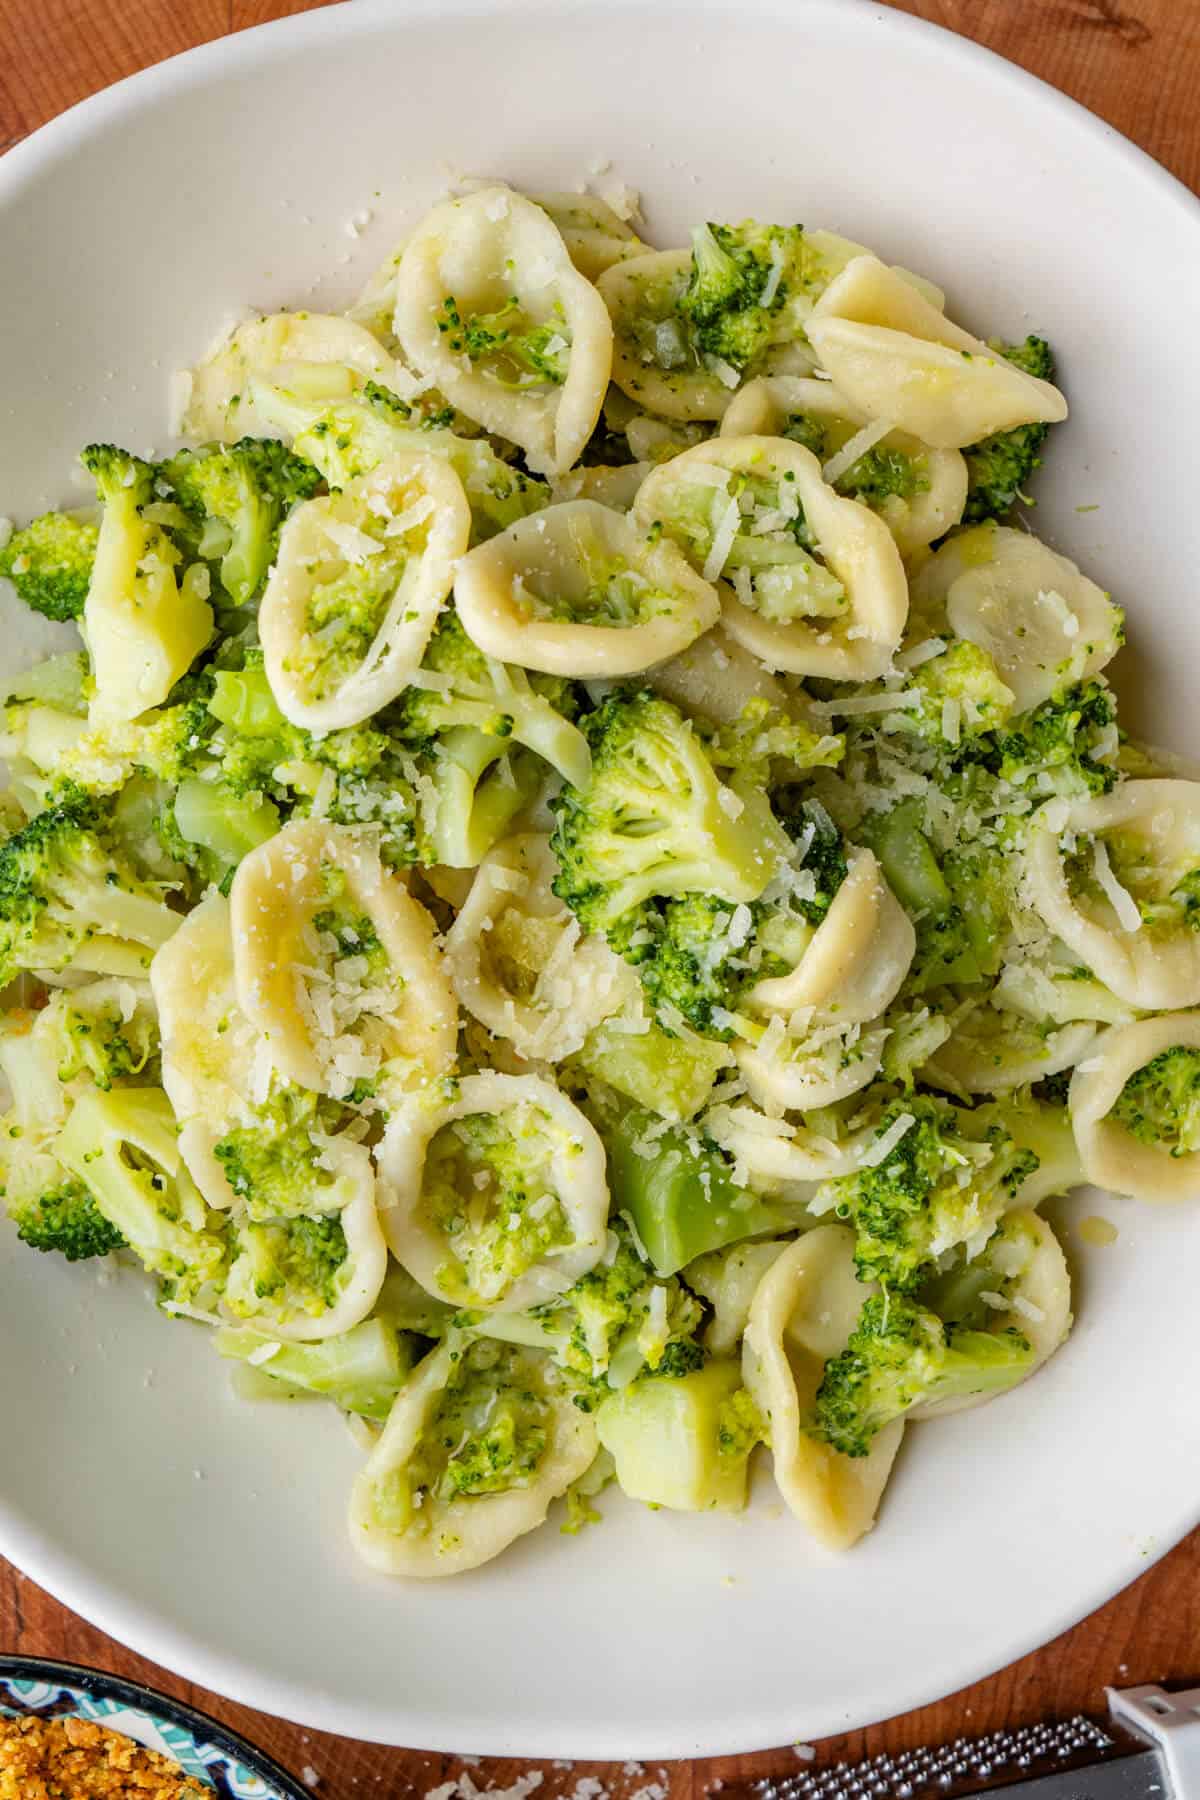 Broccoli pasta served in a bowl with parmesan cheese